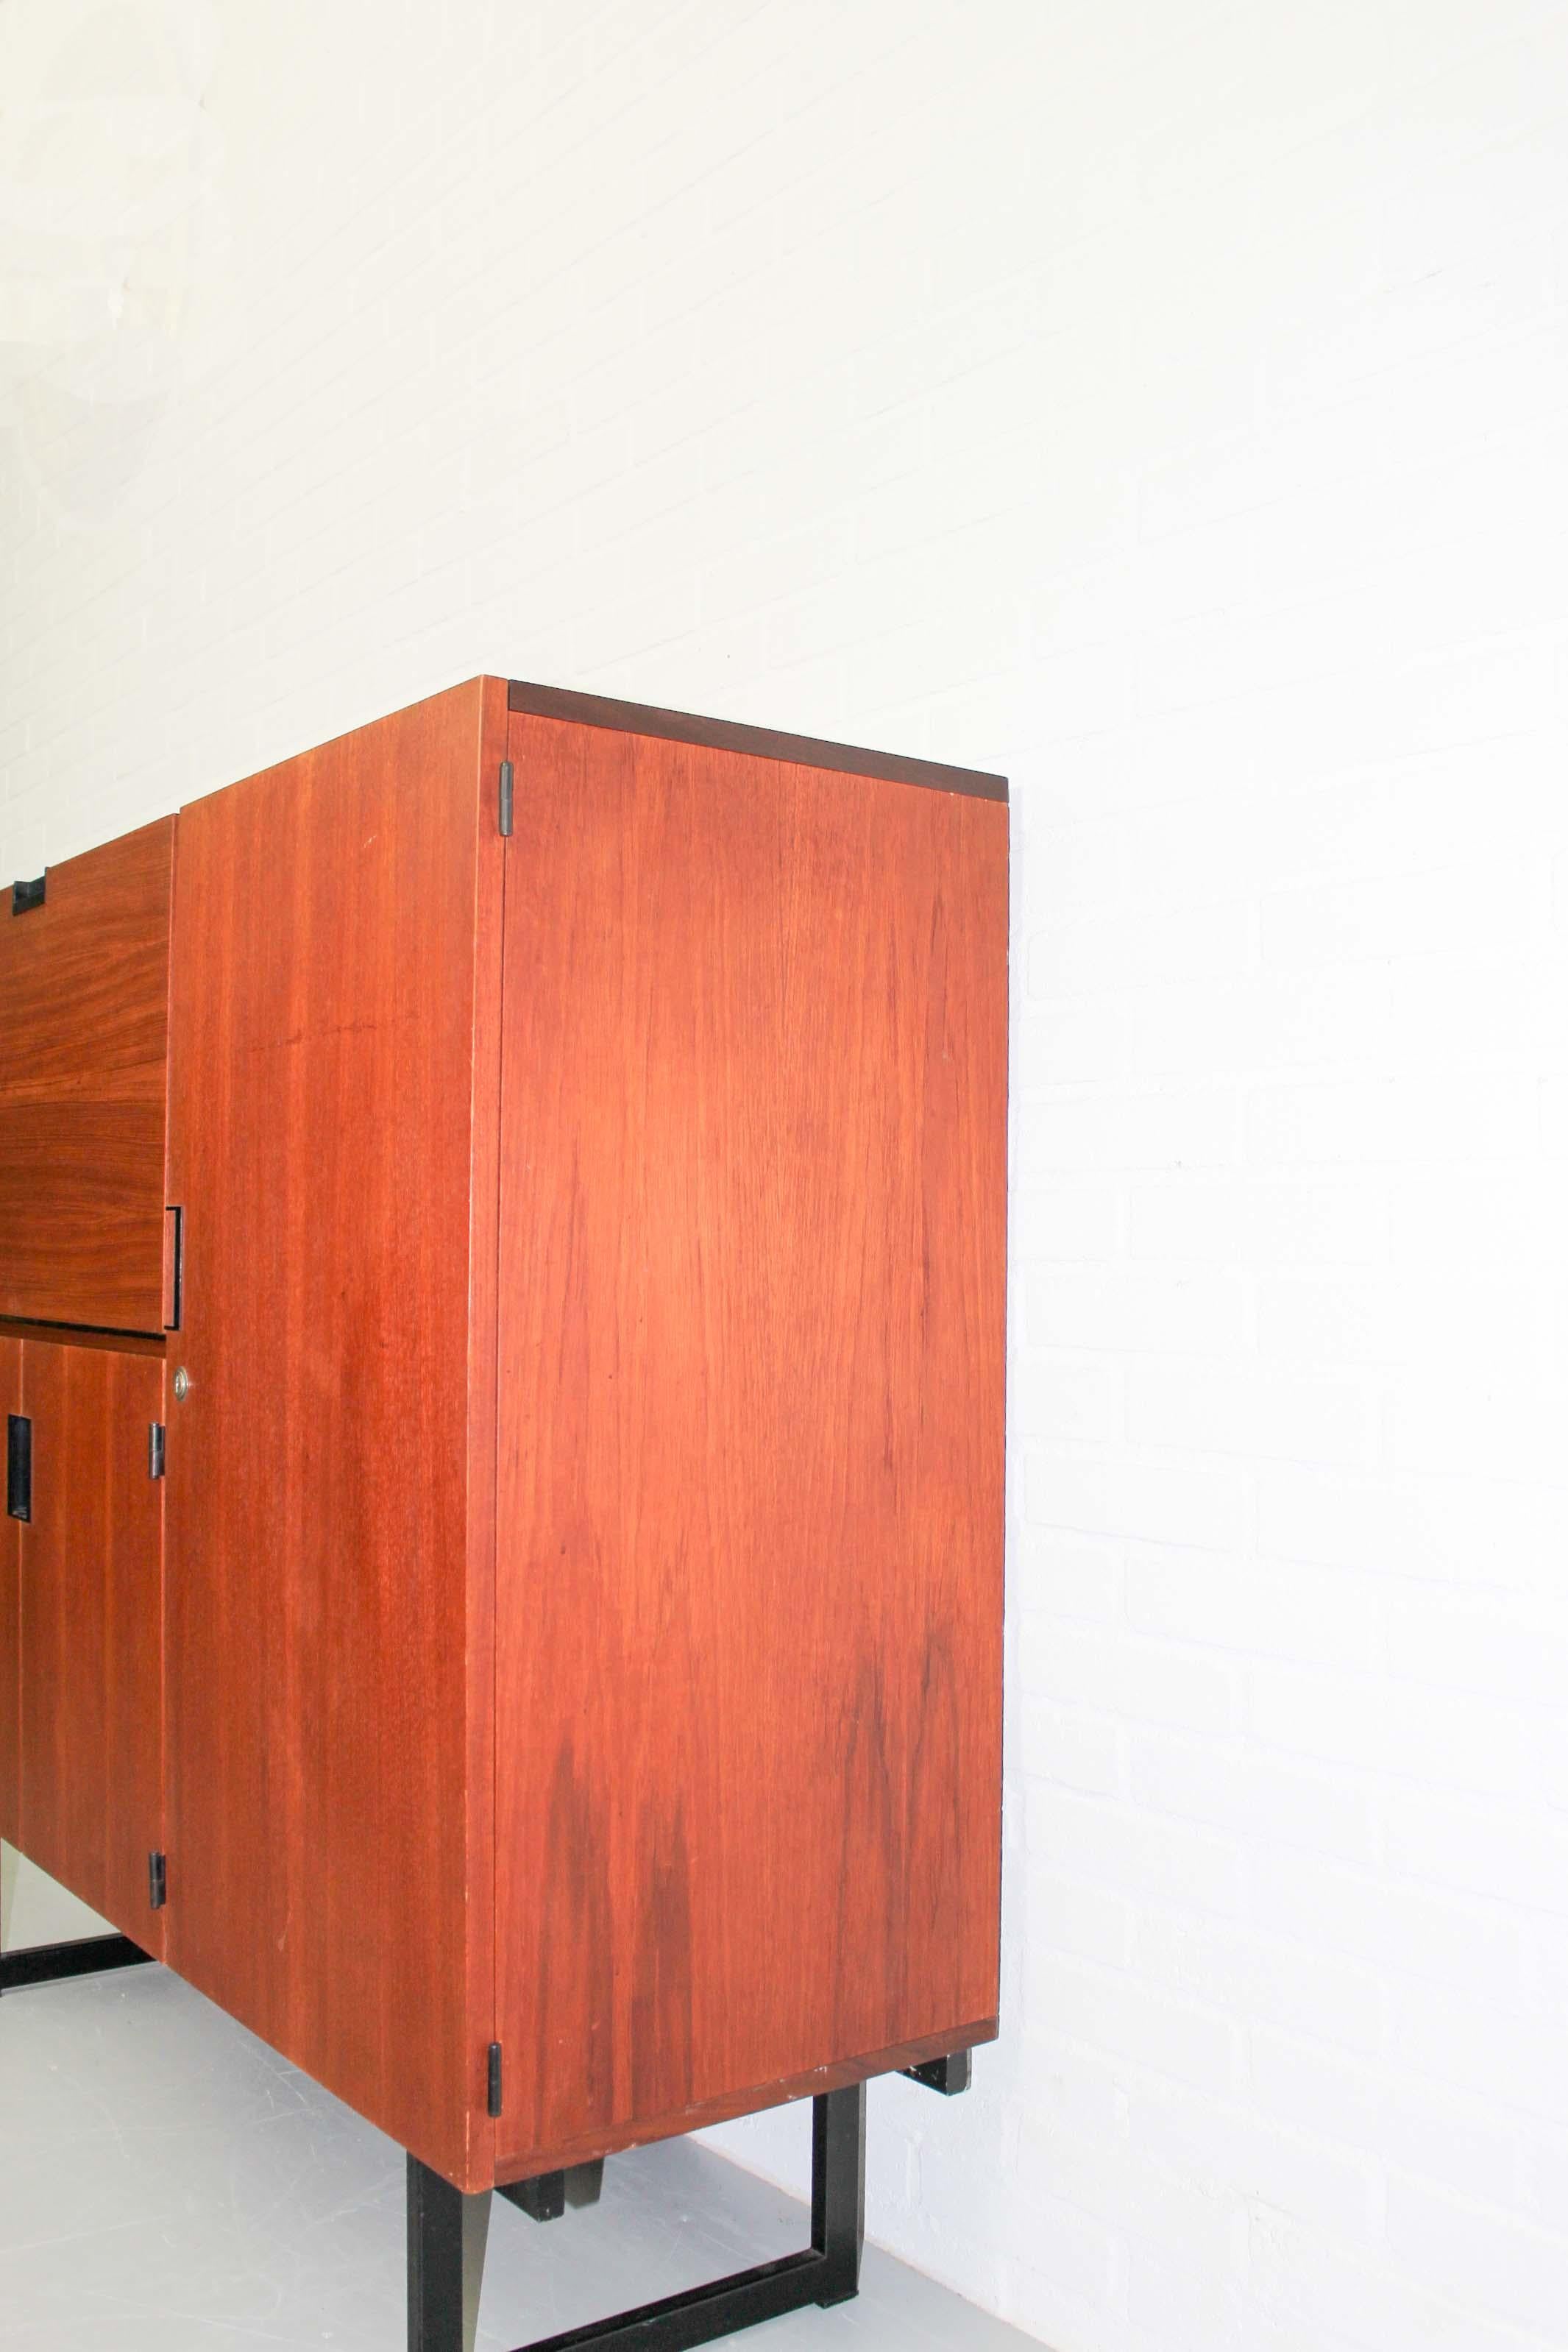 Teak Japanese Series Highboard by Cees Braakman for Pastoe, the Netherlands, 1960s For Sale